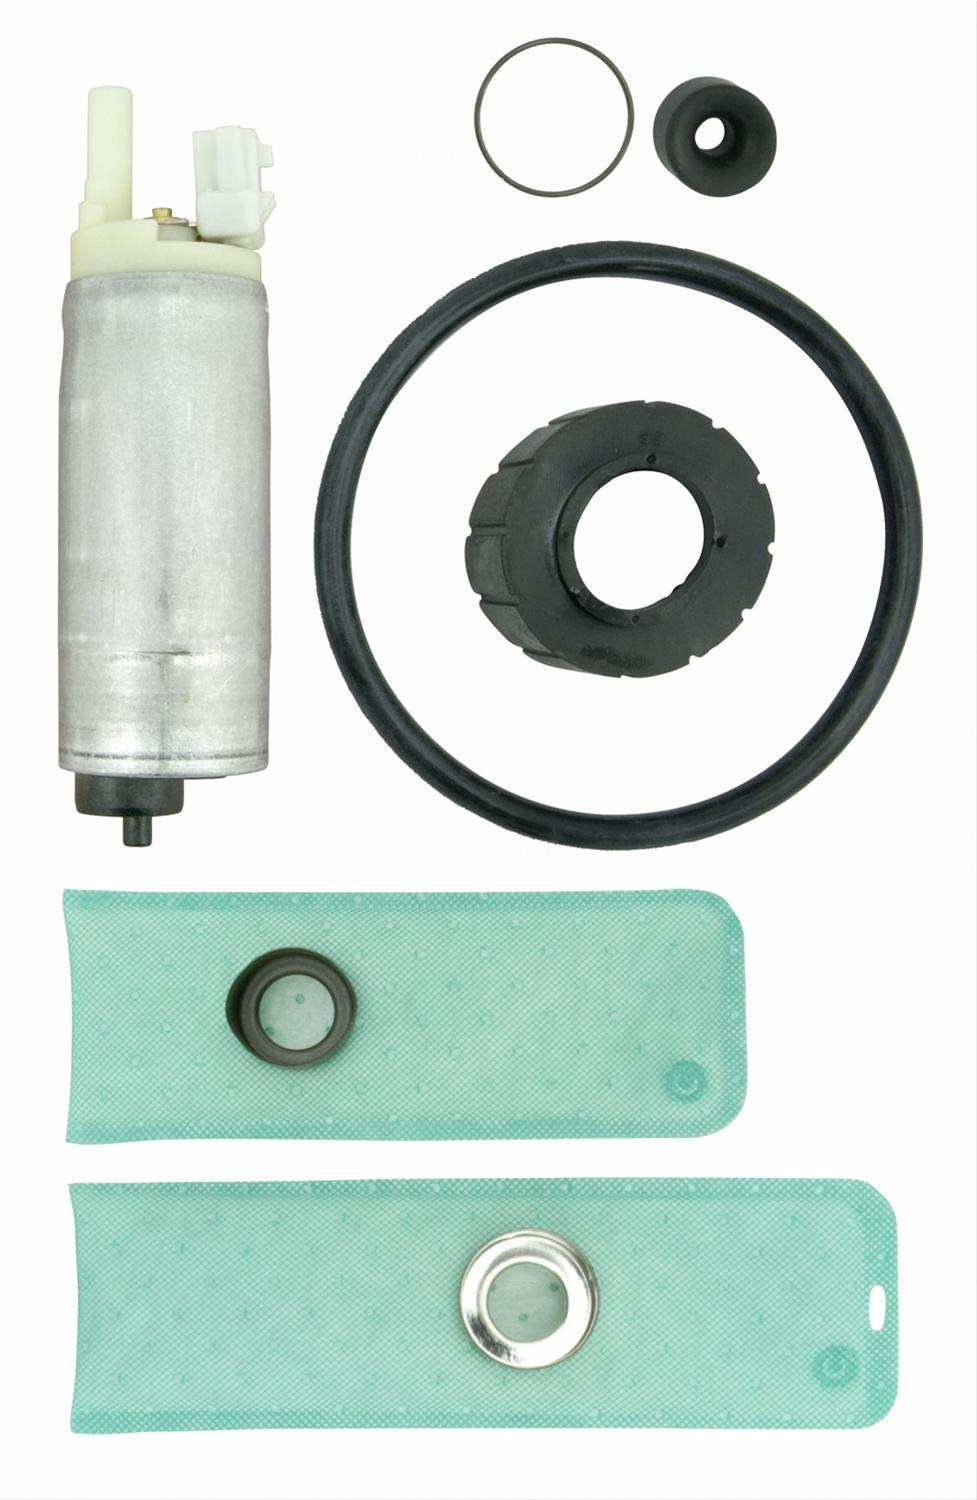 EFI In-Tank Electric Fuel Pump And Strainer Set for 1992-1996 GM Vehicles